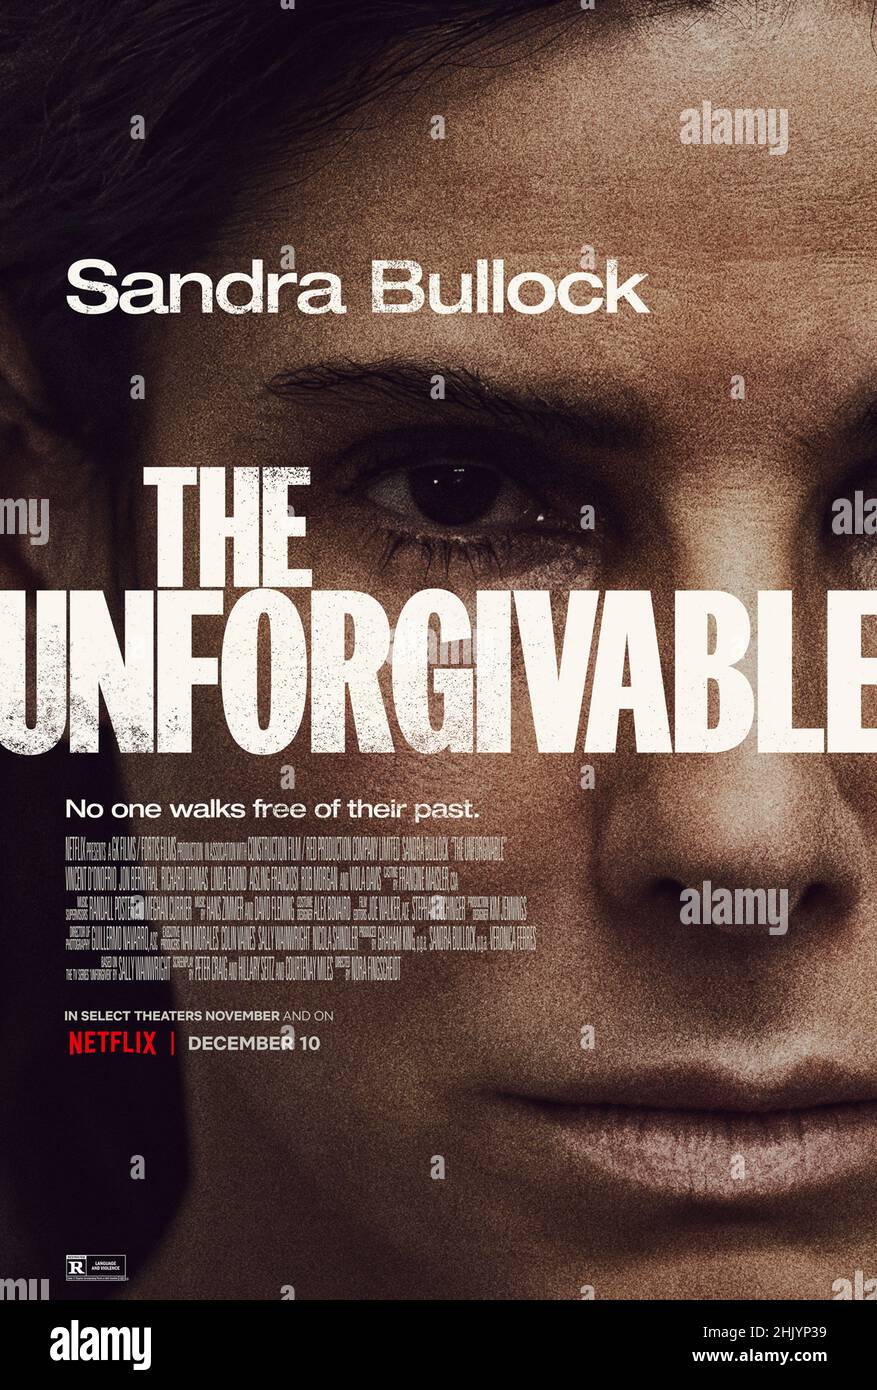 The Unforgivable (2021) directed by Nora Fingscheidt and starring Sandra Bullock, Viola Davis and Vincent D'Onofrio. A woman is released from prison after serving a sentence for a violent crime and re-enters a society that refuses to forgive her past. Stock Photo